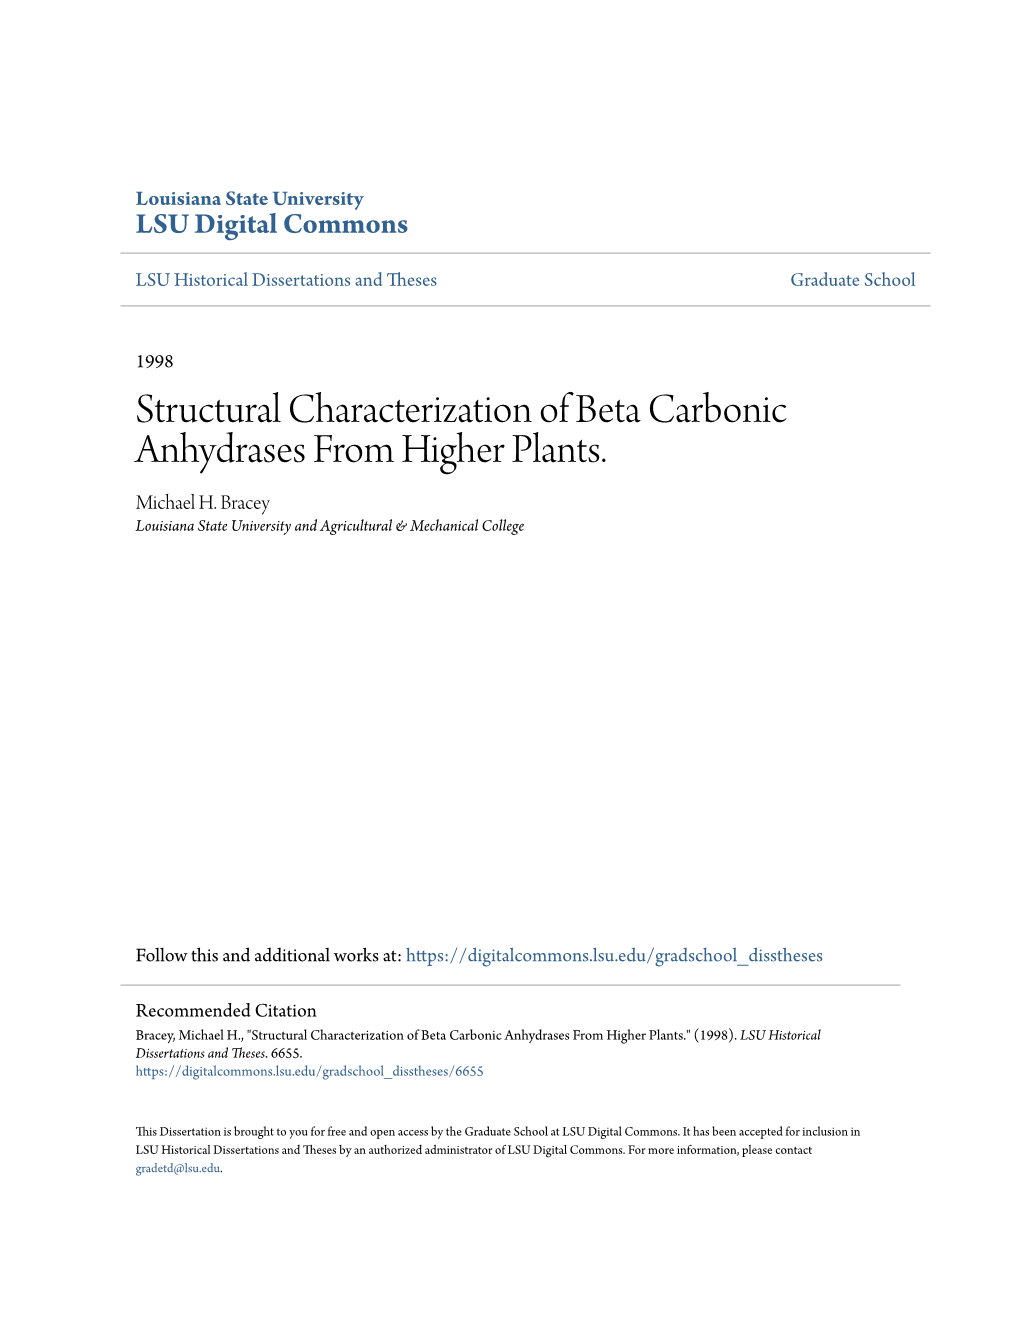 Structural Characterization of Beta Carbonic Anhydrases from Higher Plants